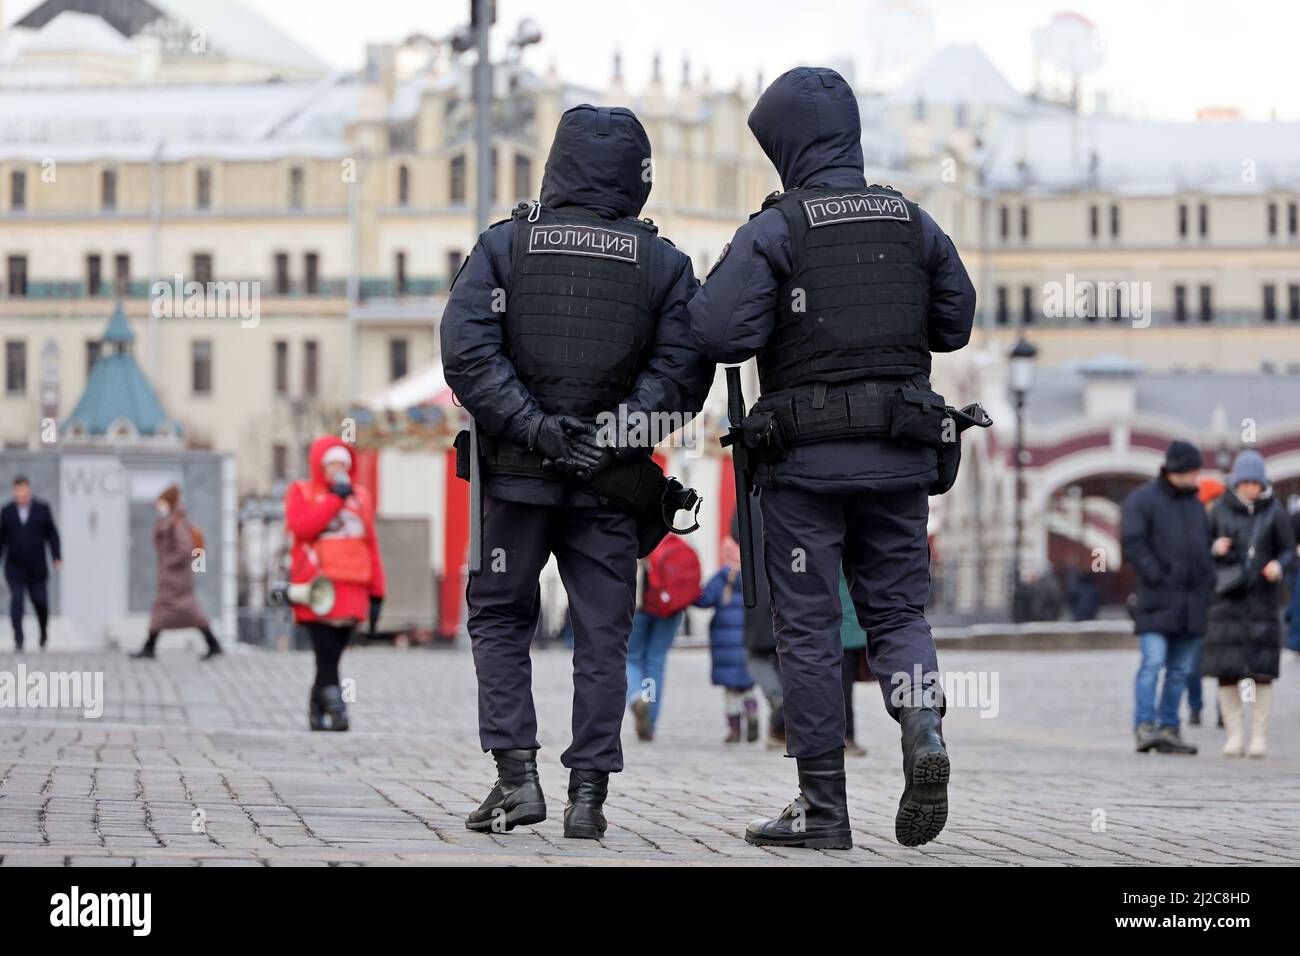 Russian police officers in bulletproof vests patrol a city street in Moscow at spring. Translation of inscription on the male backs: 'Police' Stock Photo